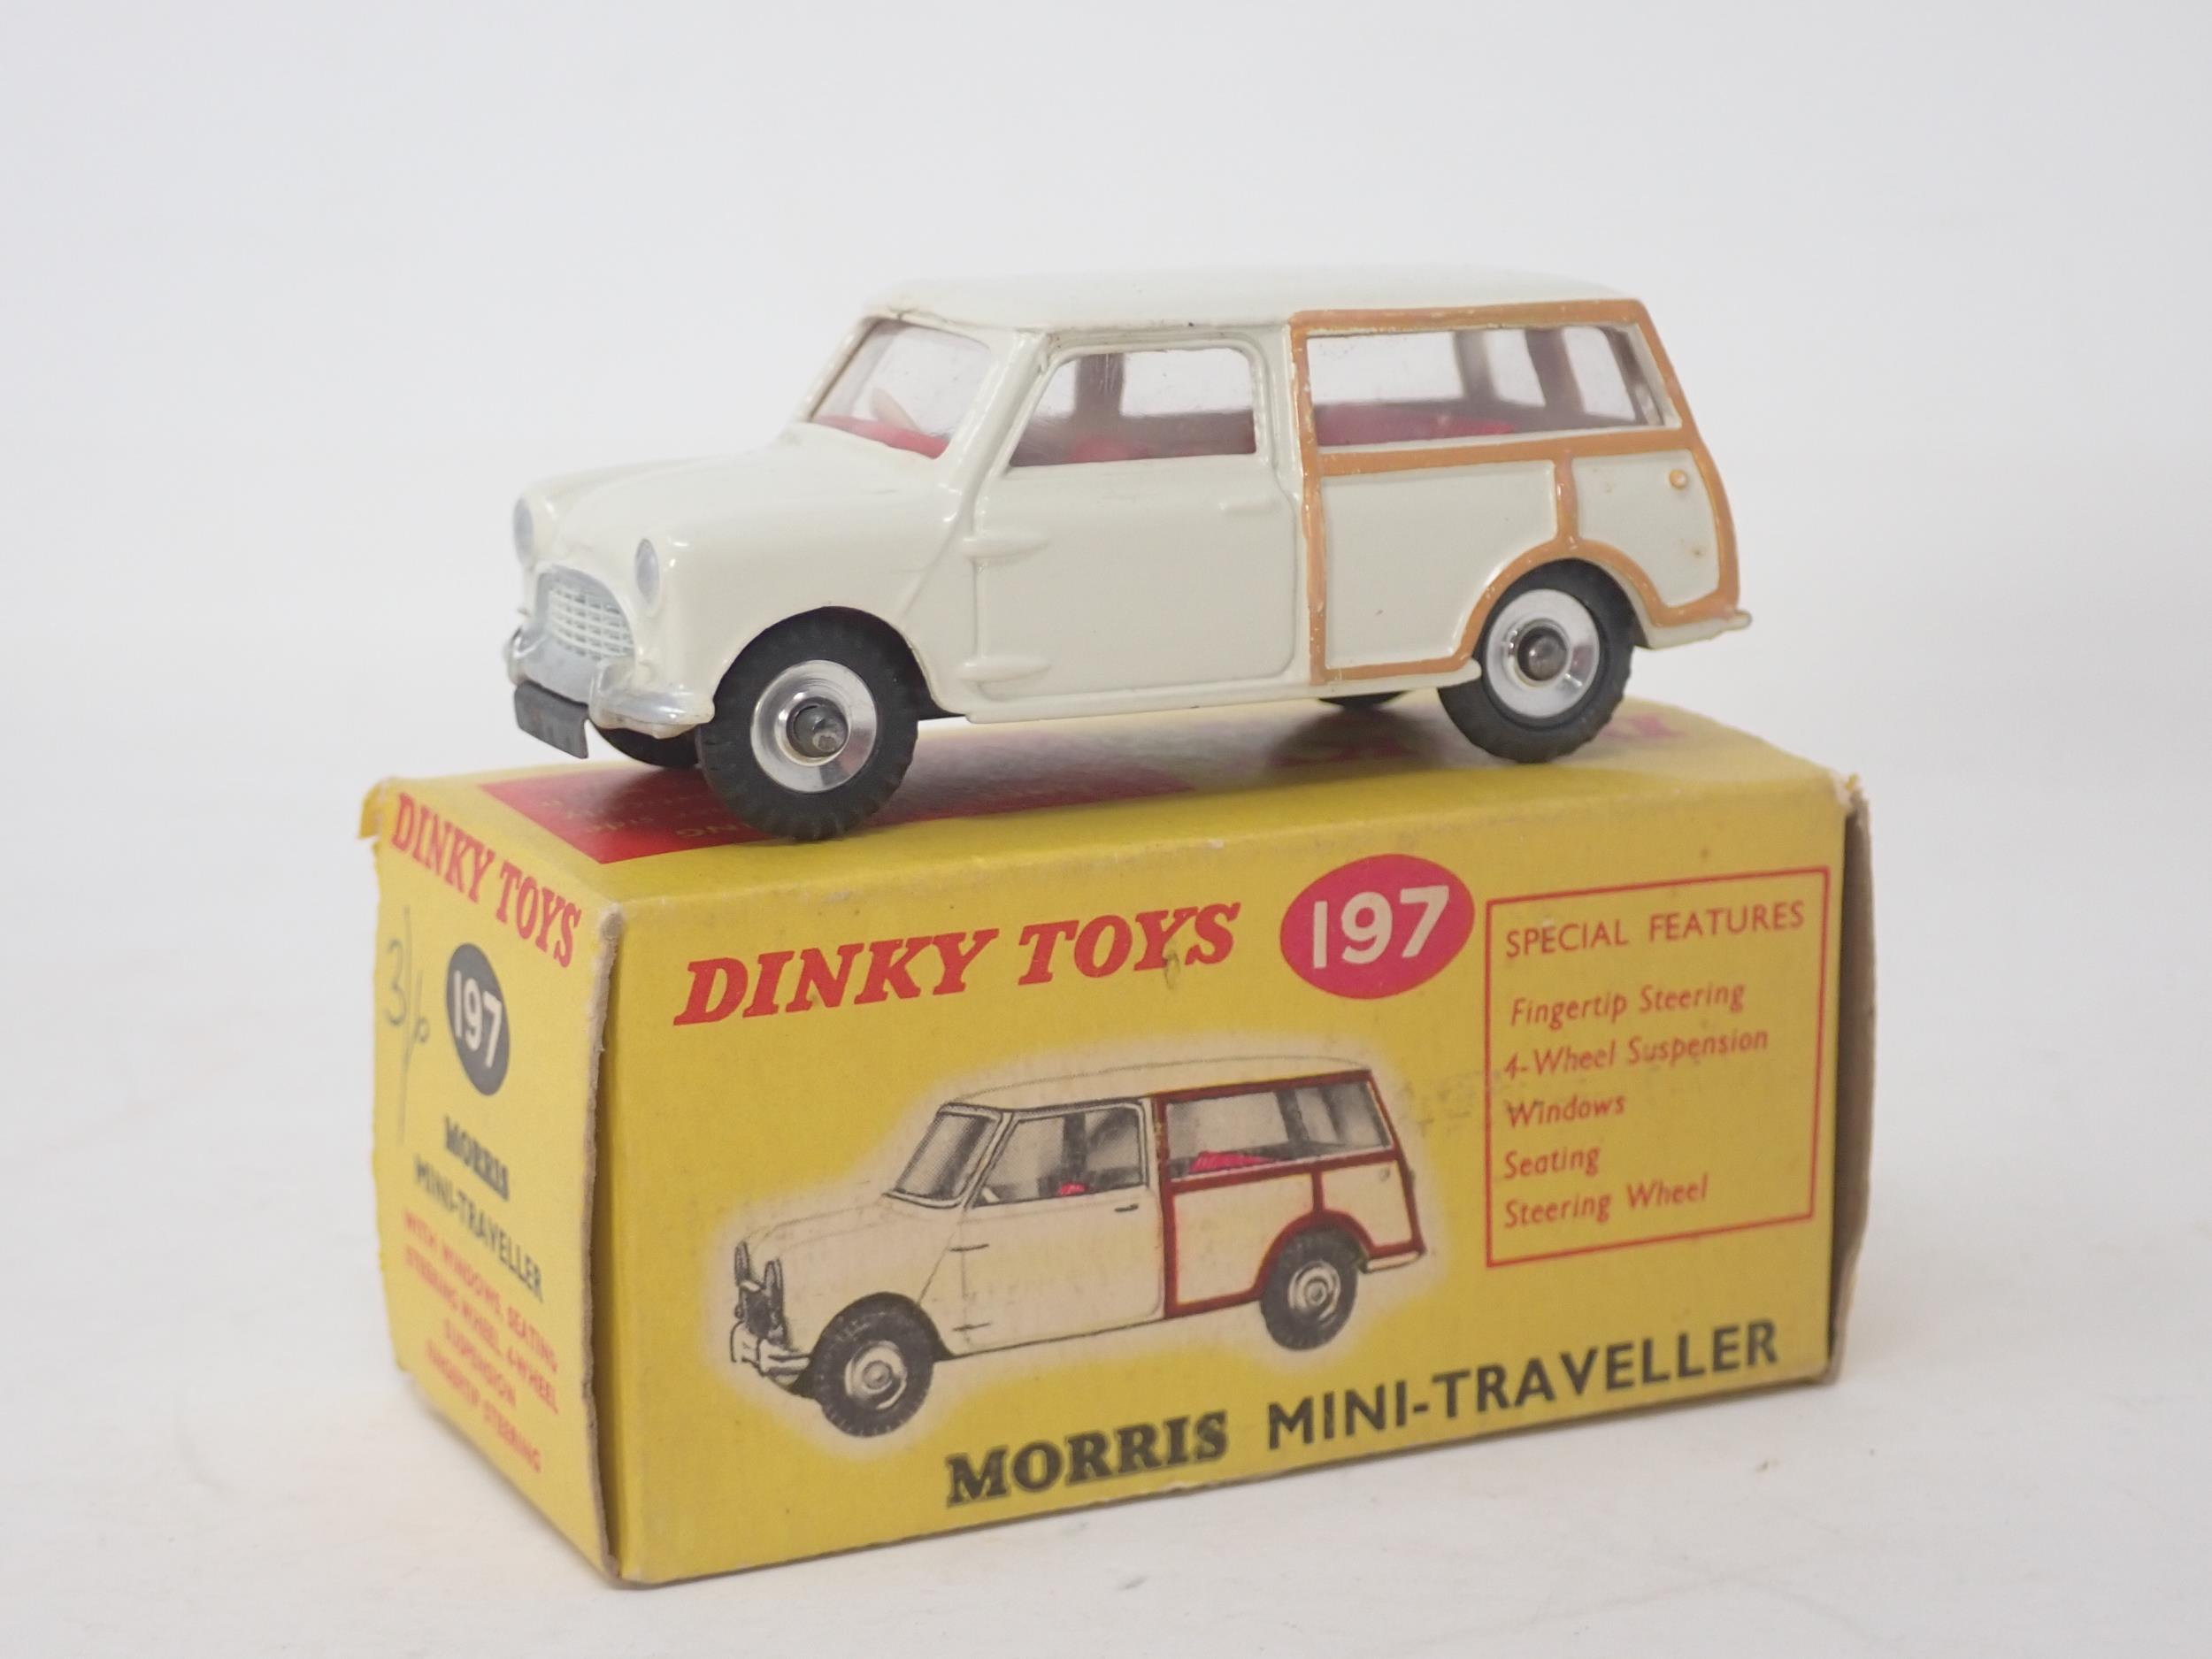 A boxed Dinky Toys No.197 cream Morris Mini-Traveller with red interior